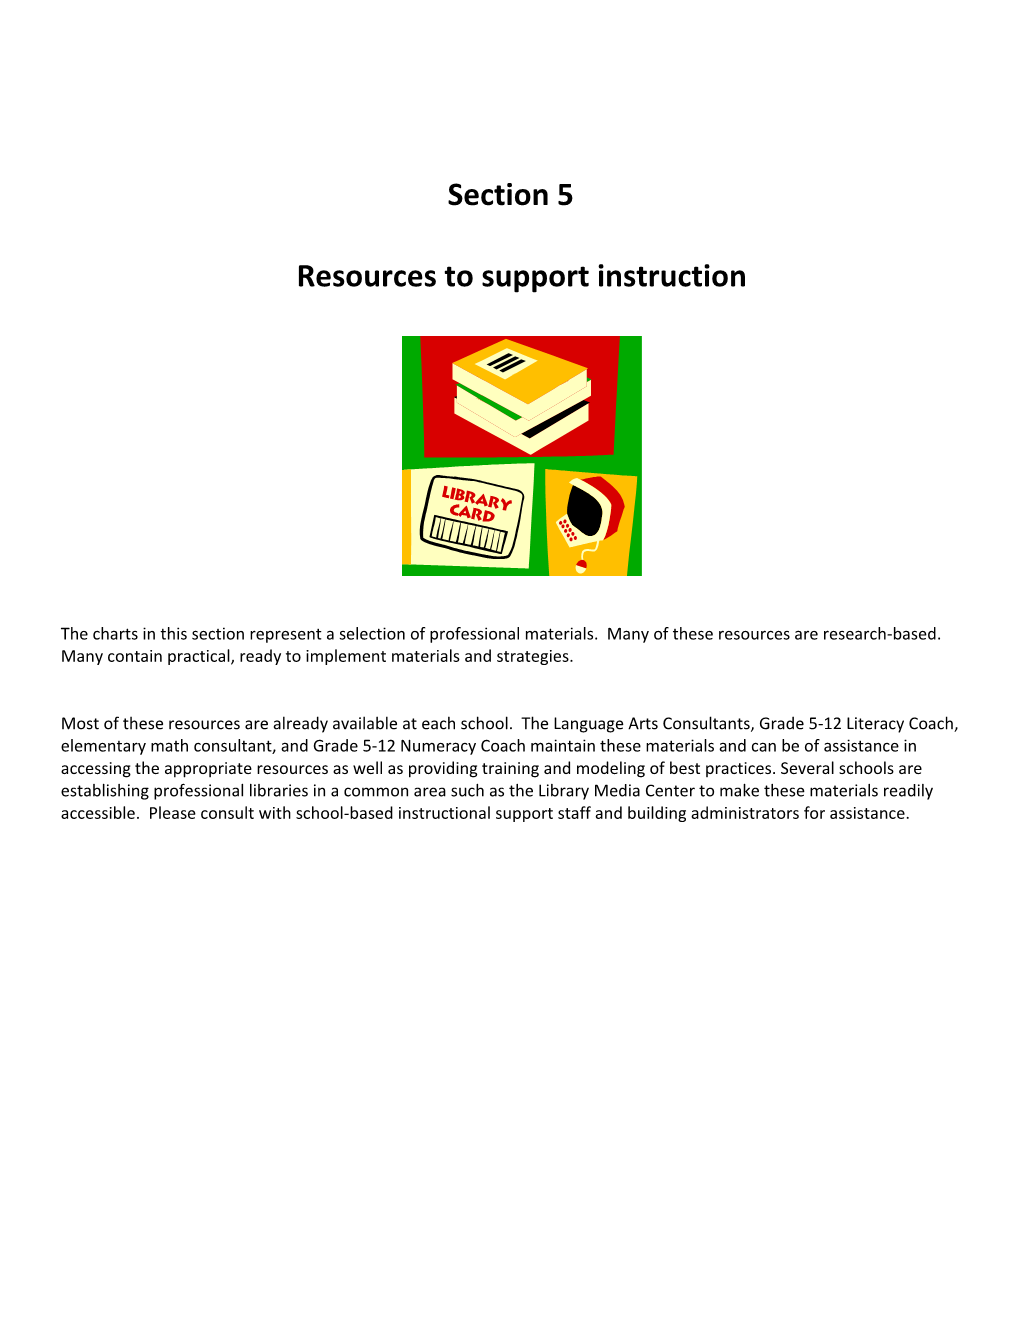 Resources to Support Instruction